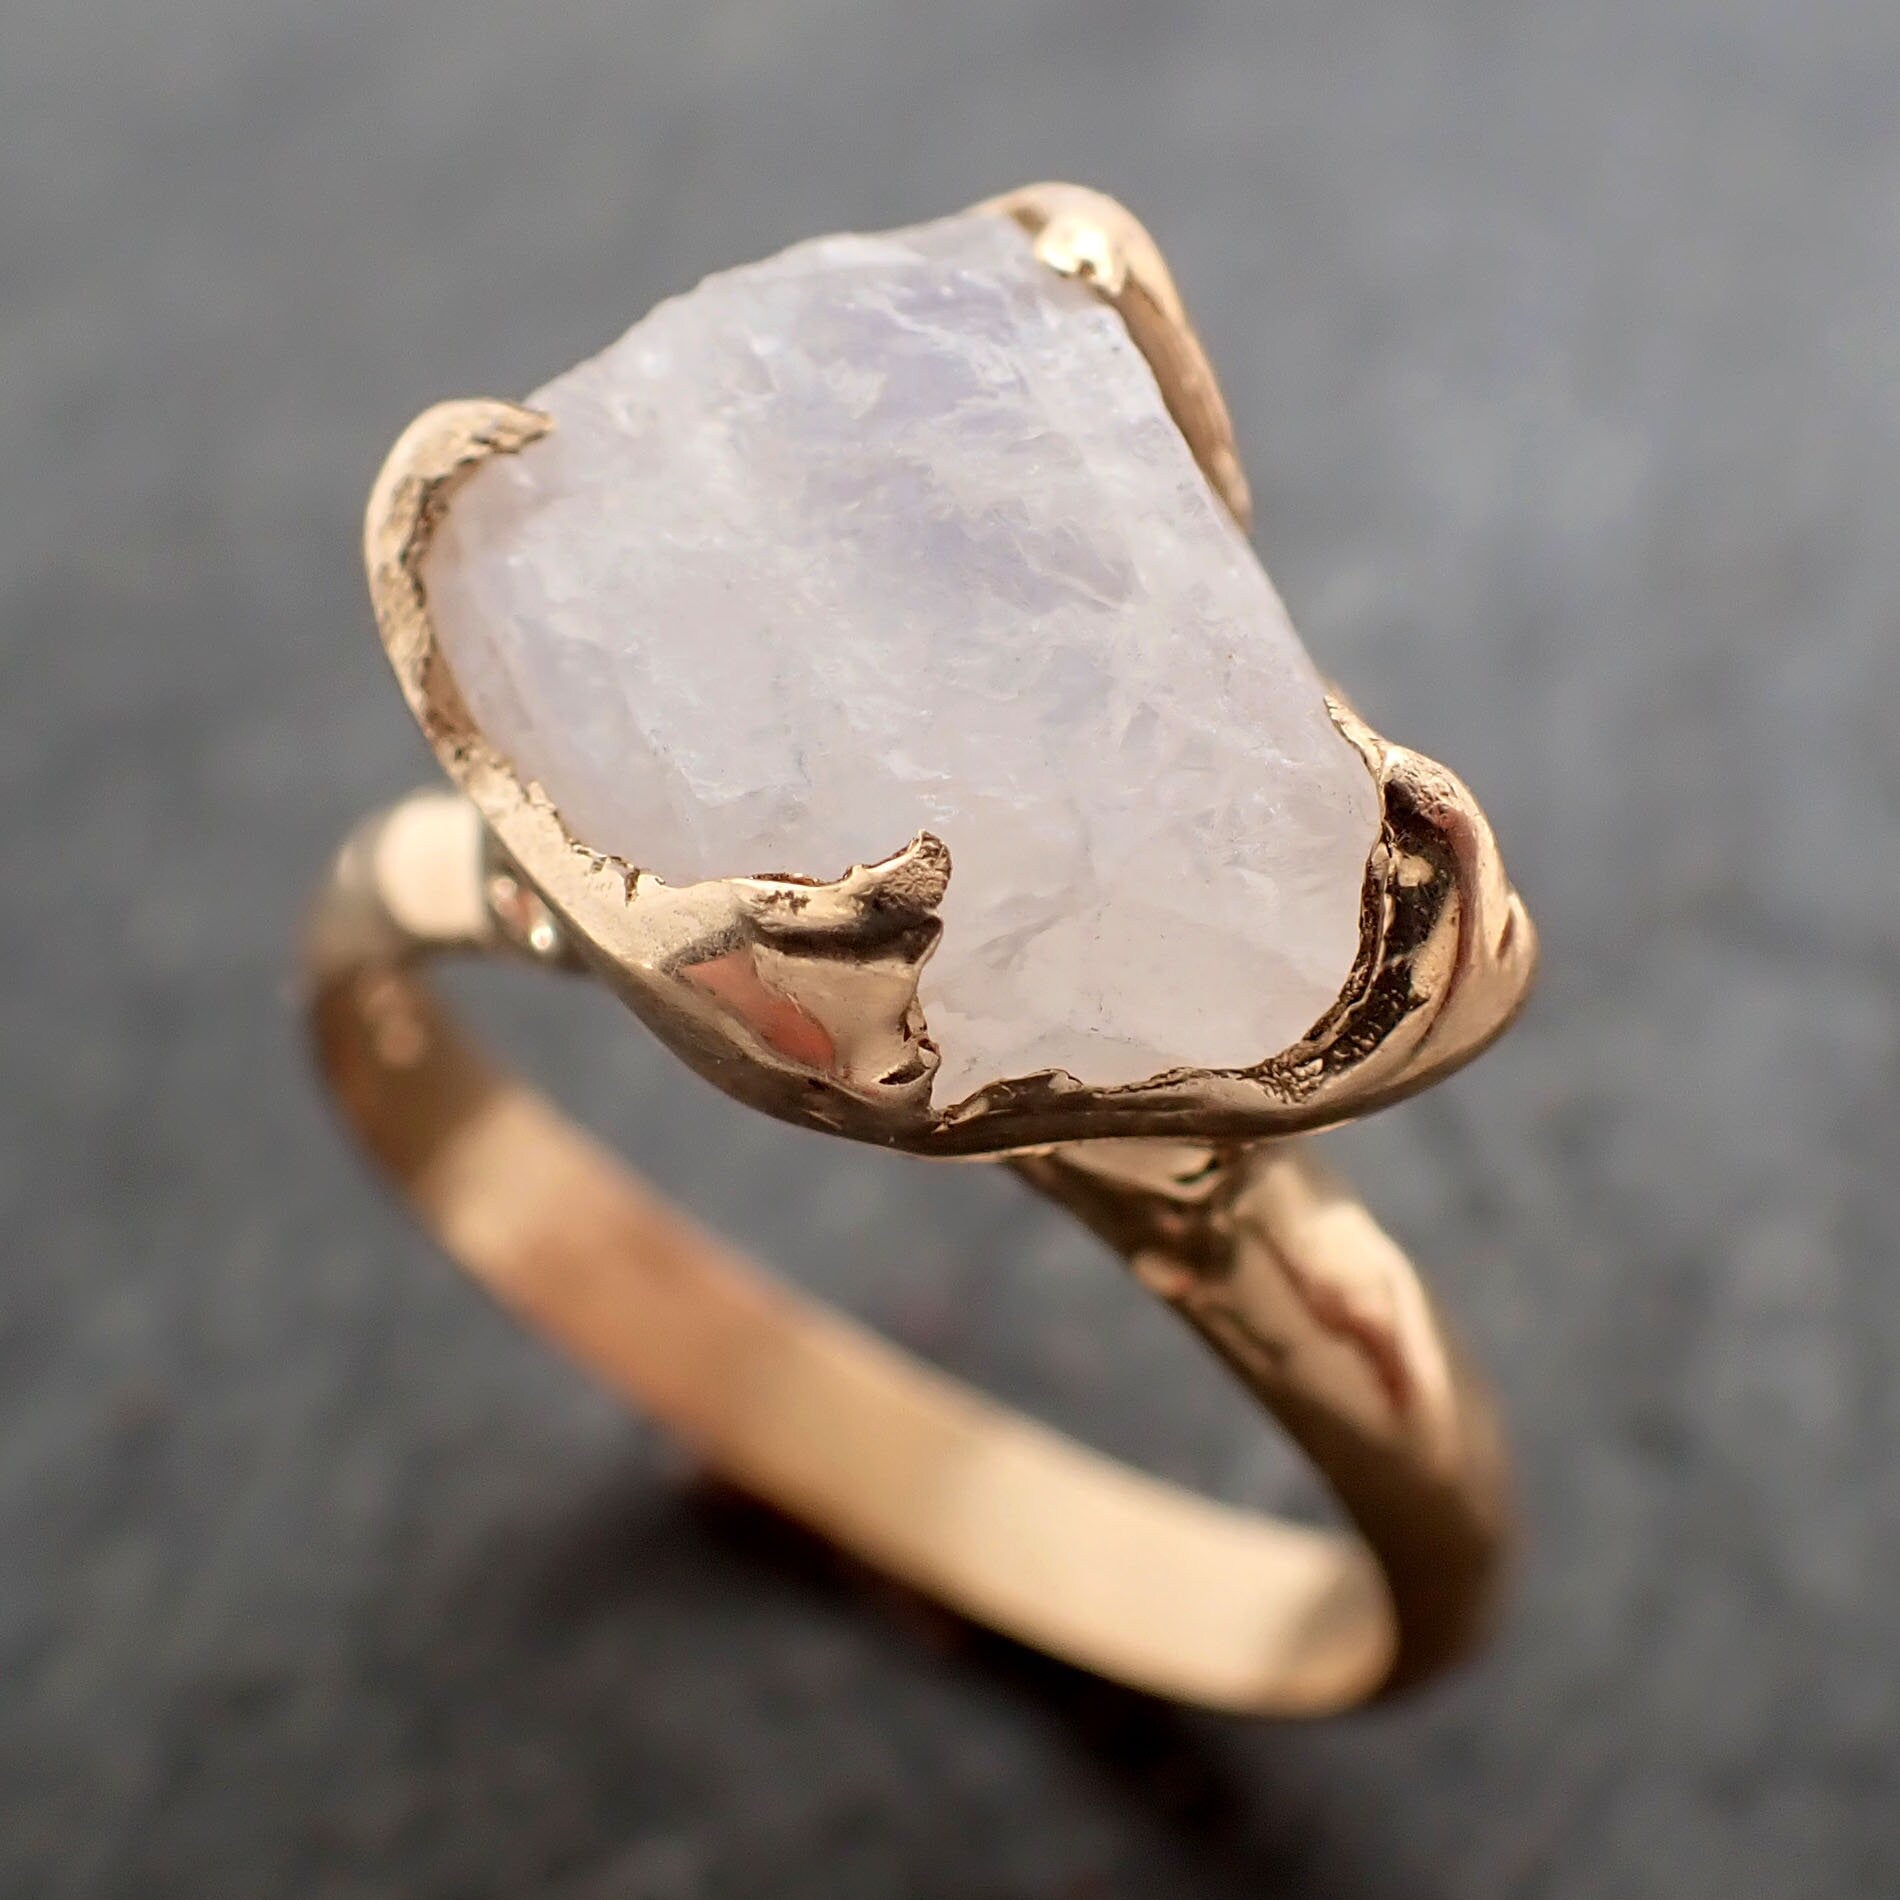 Rough Moonstone 14k Gold Ring Gemstone Solitaire recycled statement cocktail statement 2948